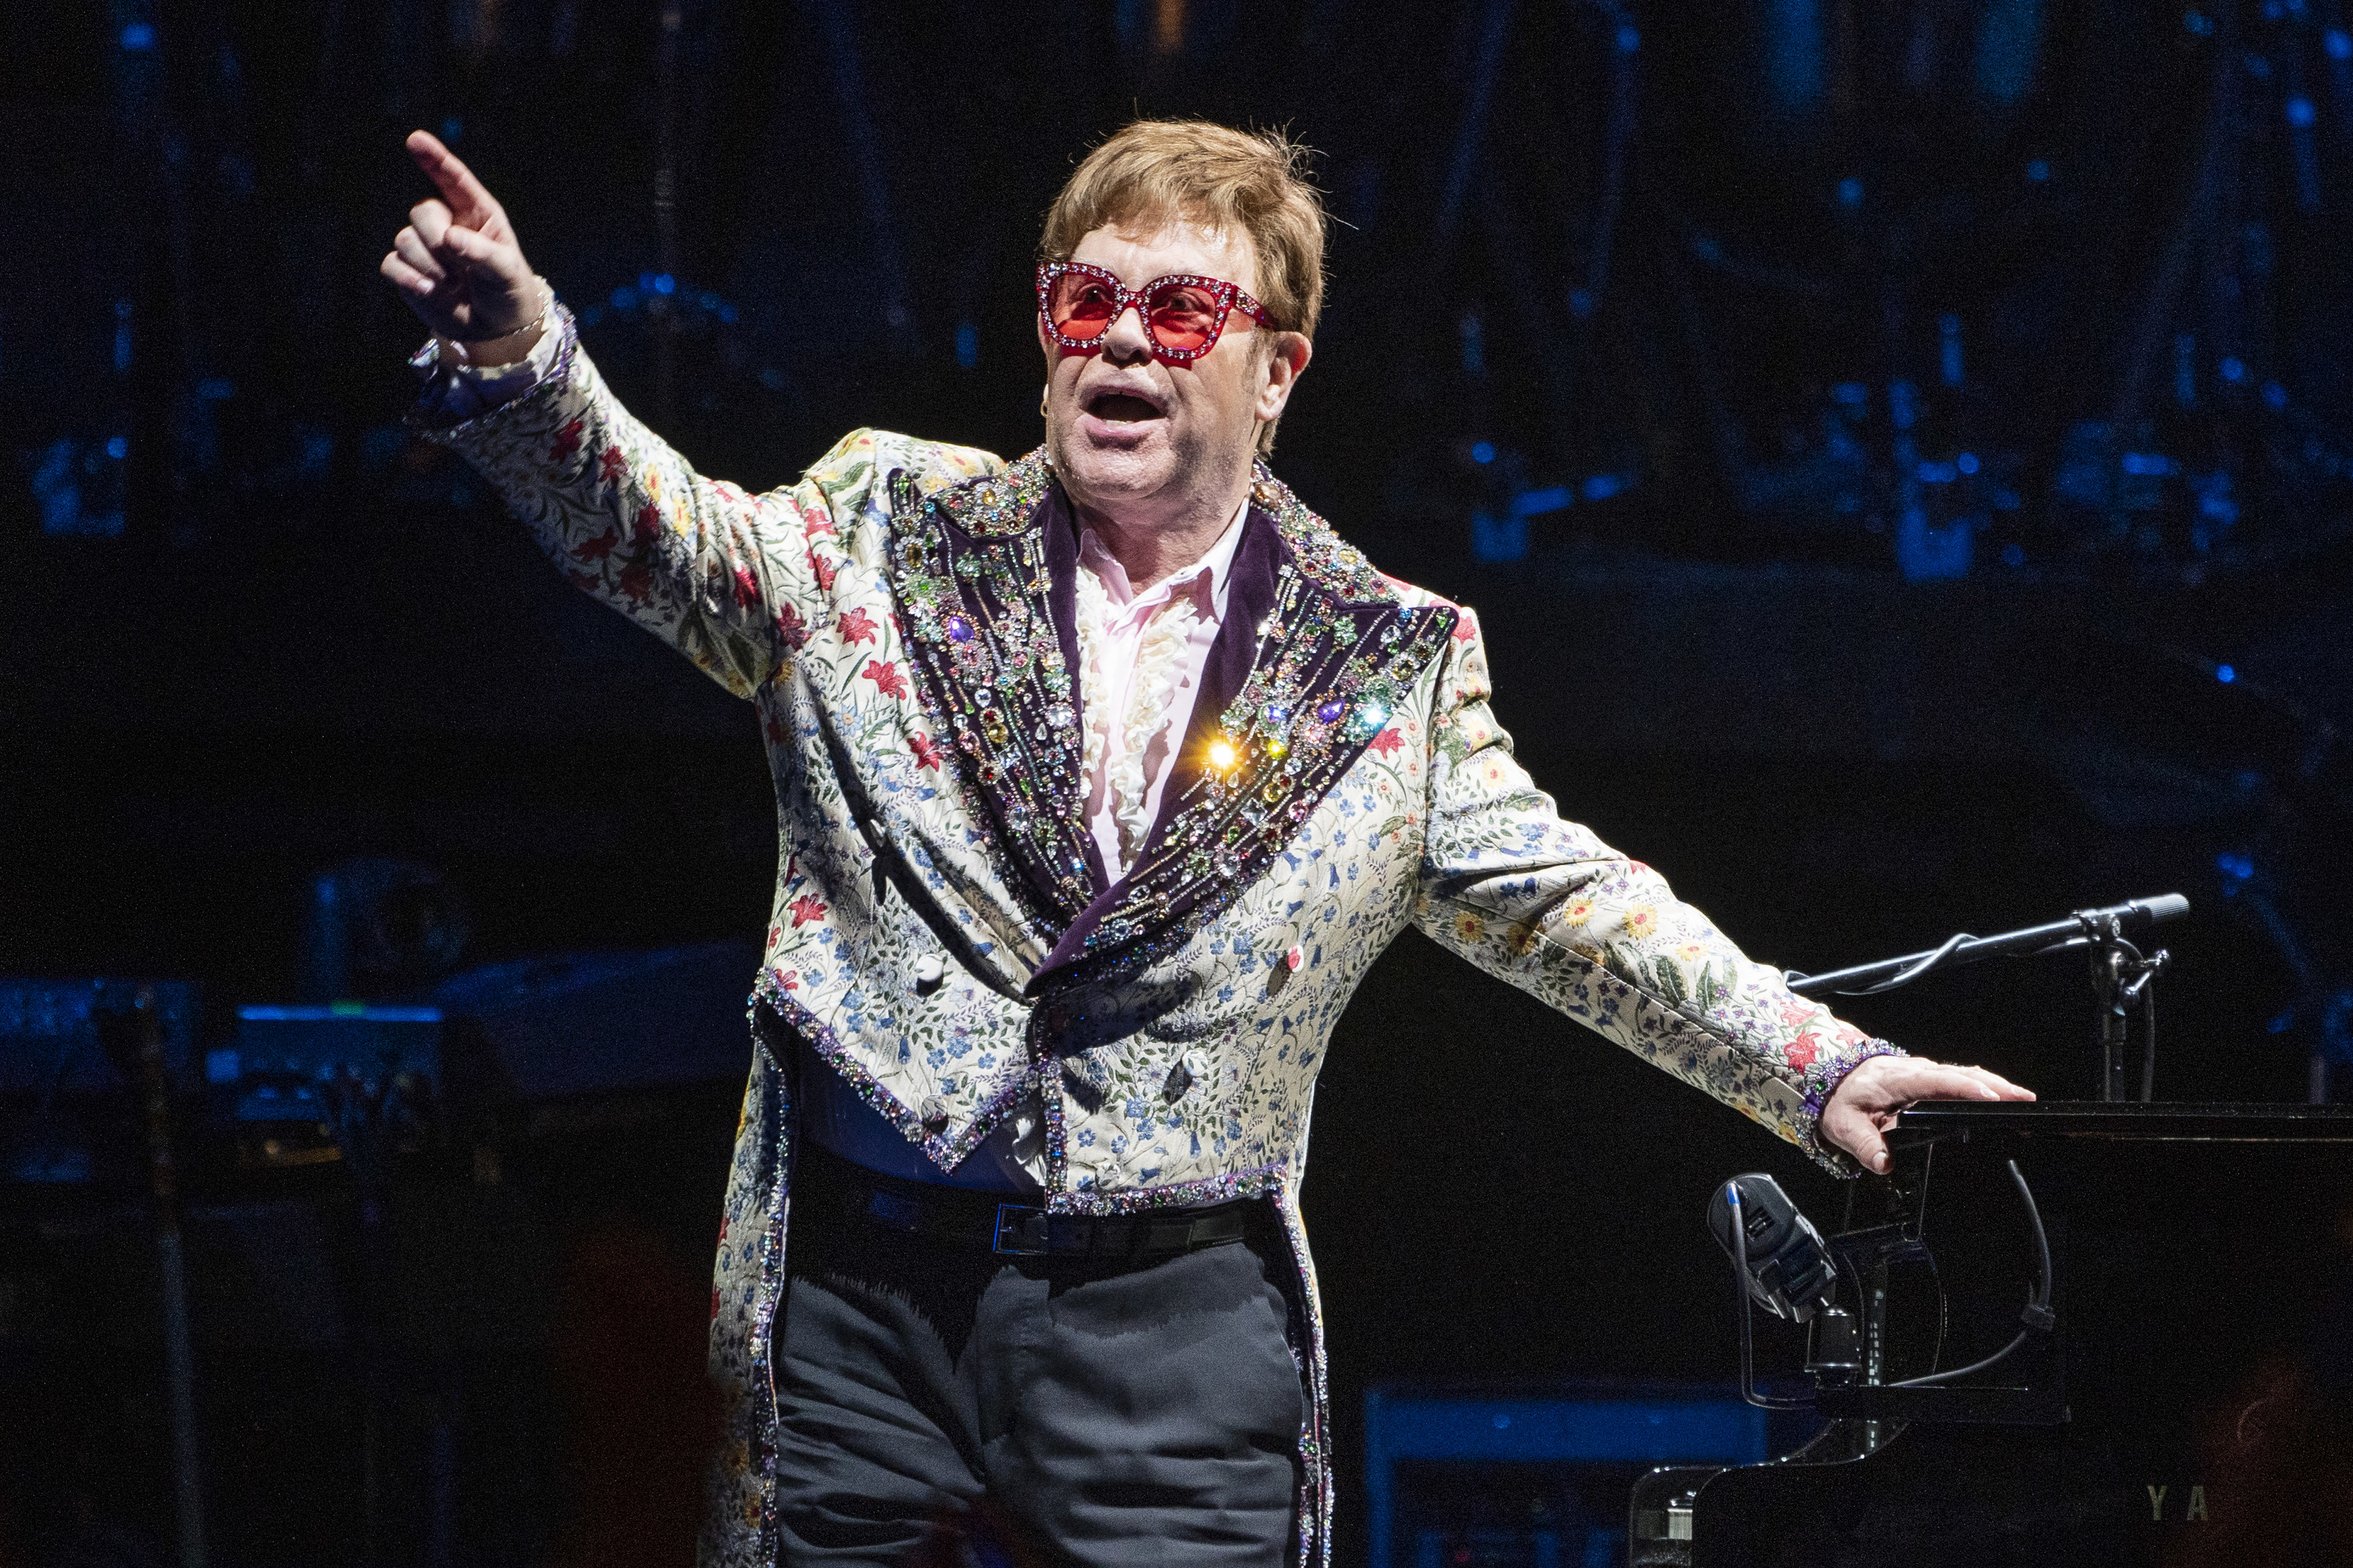 Elton leans on his piano and points to the crowd